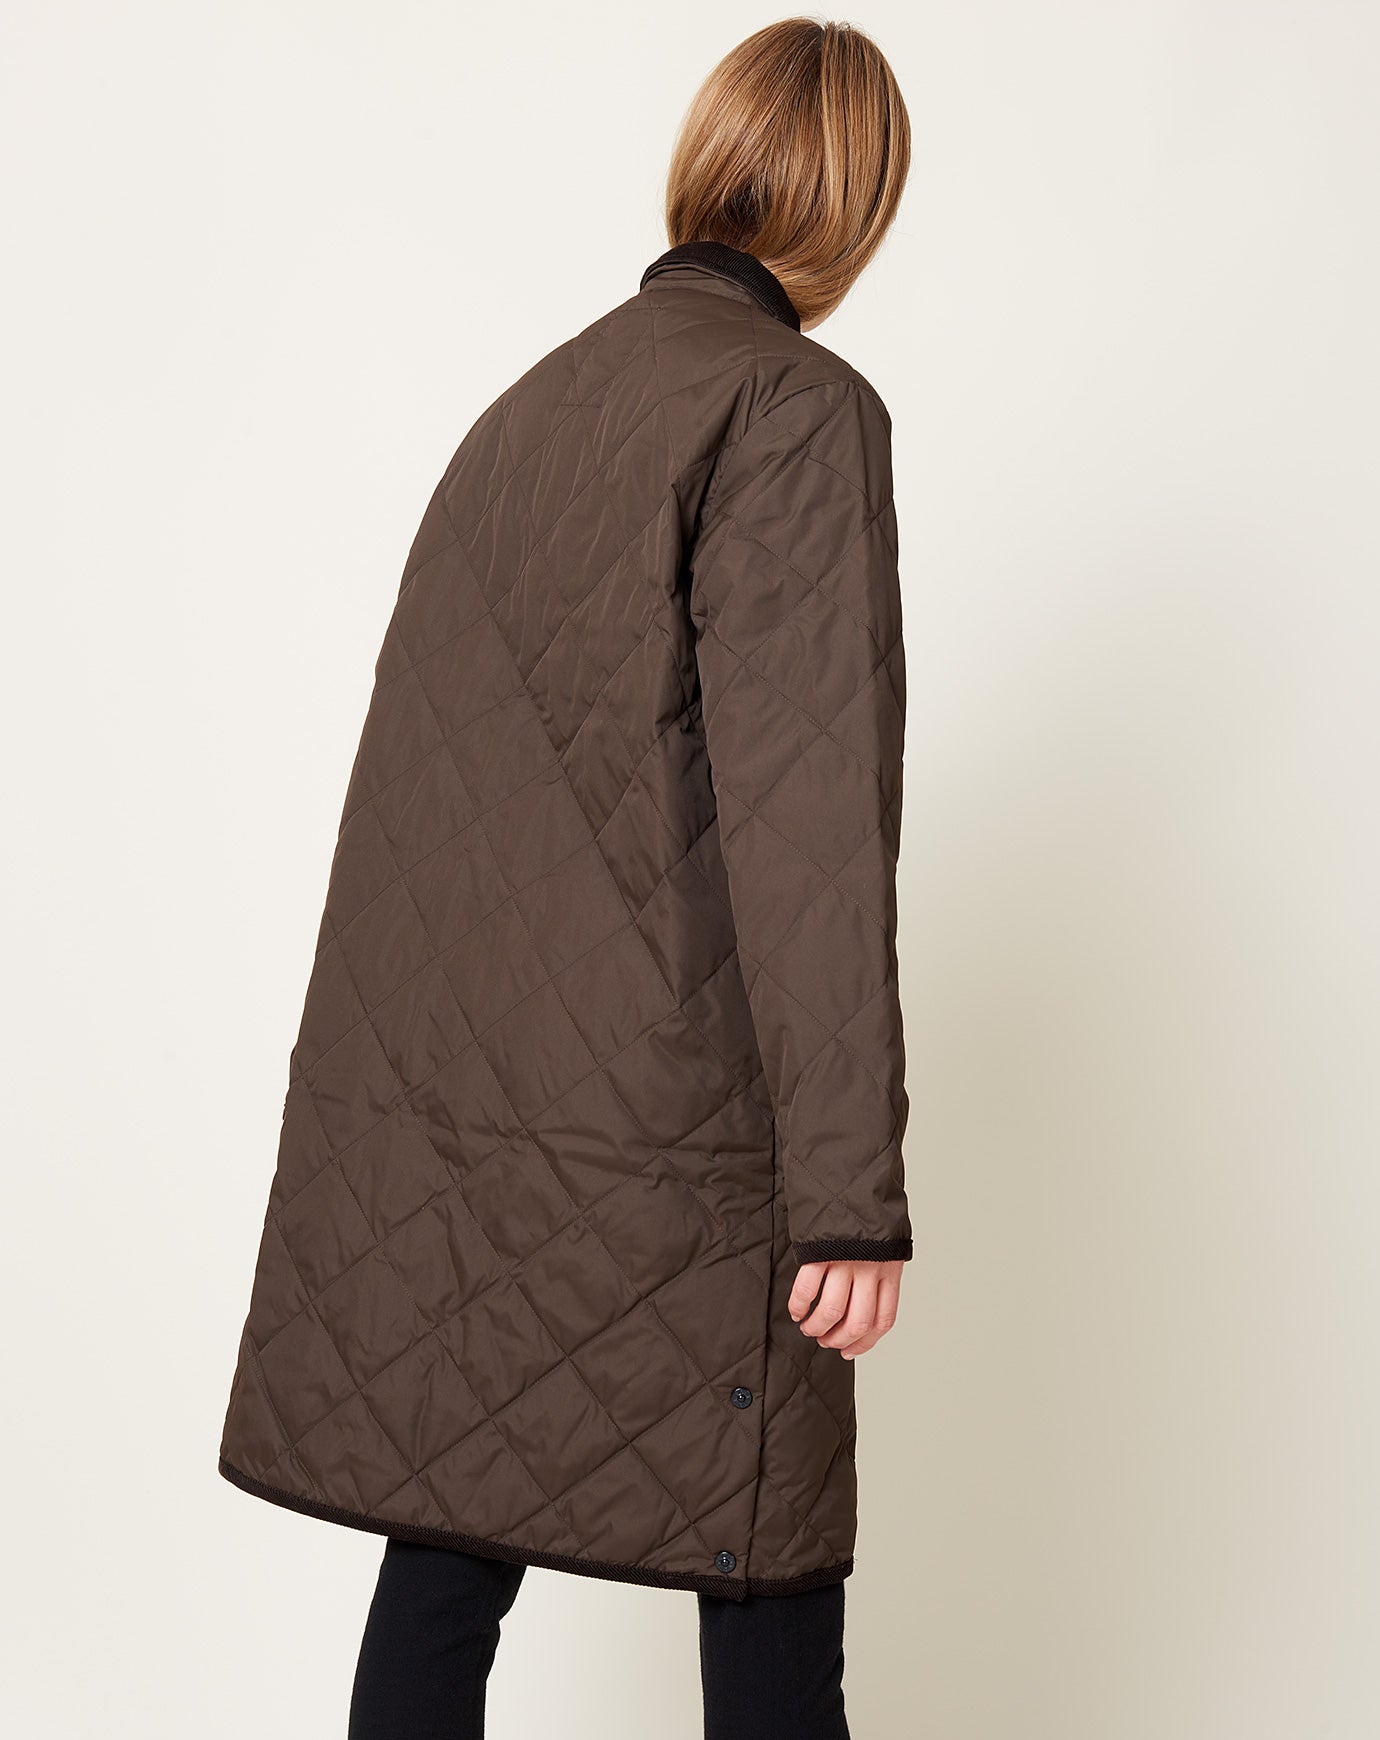 Taion Piping Collared Long Down Coat in Dark Brown